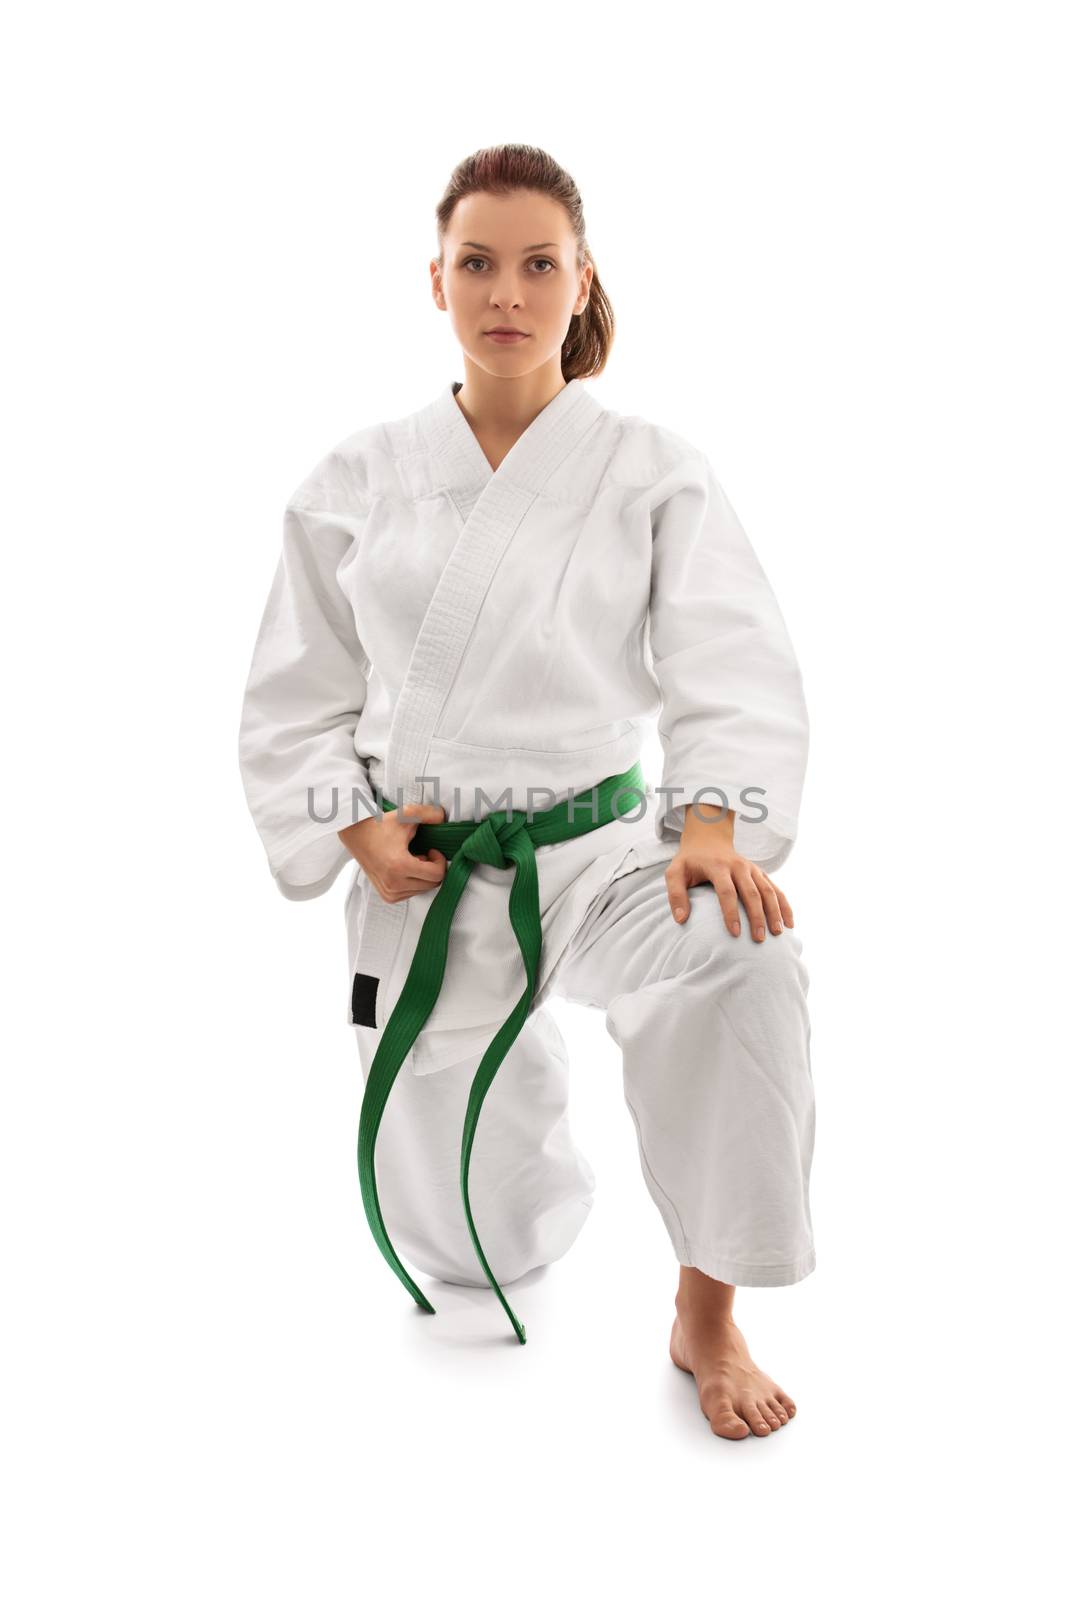 Young female martial arts fighter in white kimono and green belt kneeling on one knee and looking serious, isolated on white background. Body and spirit bent to my will.